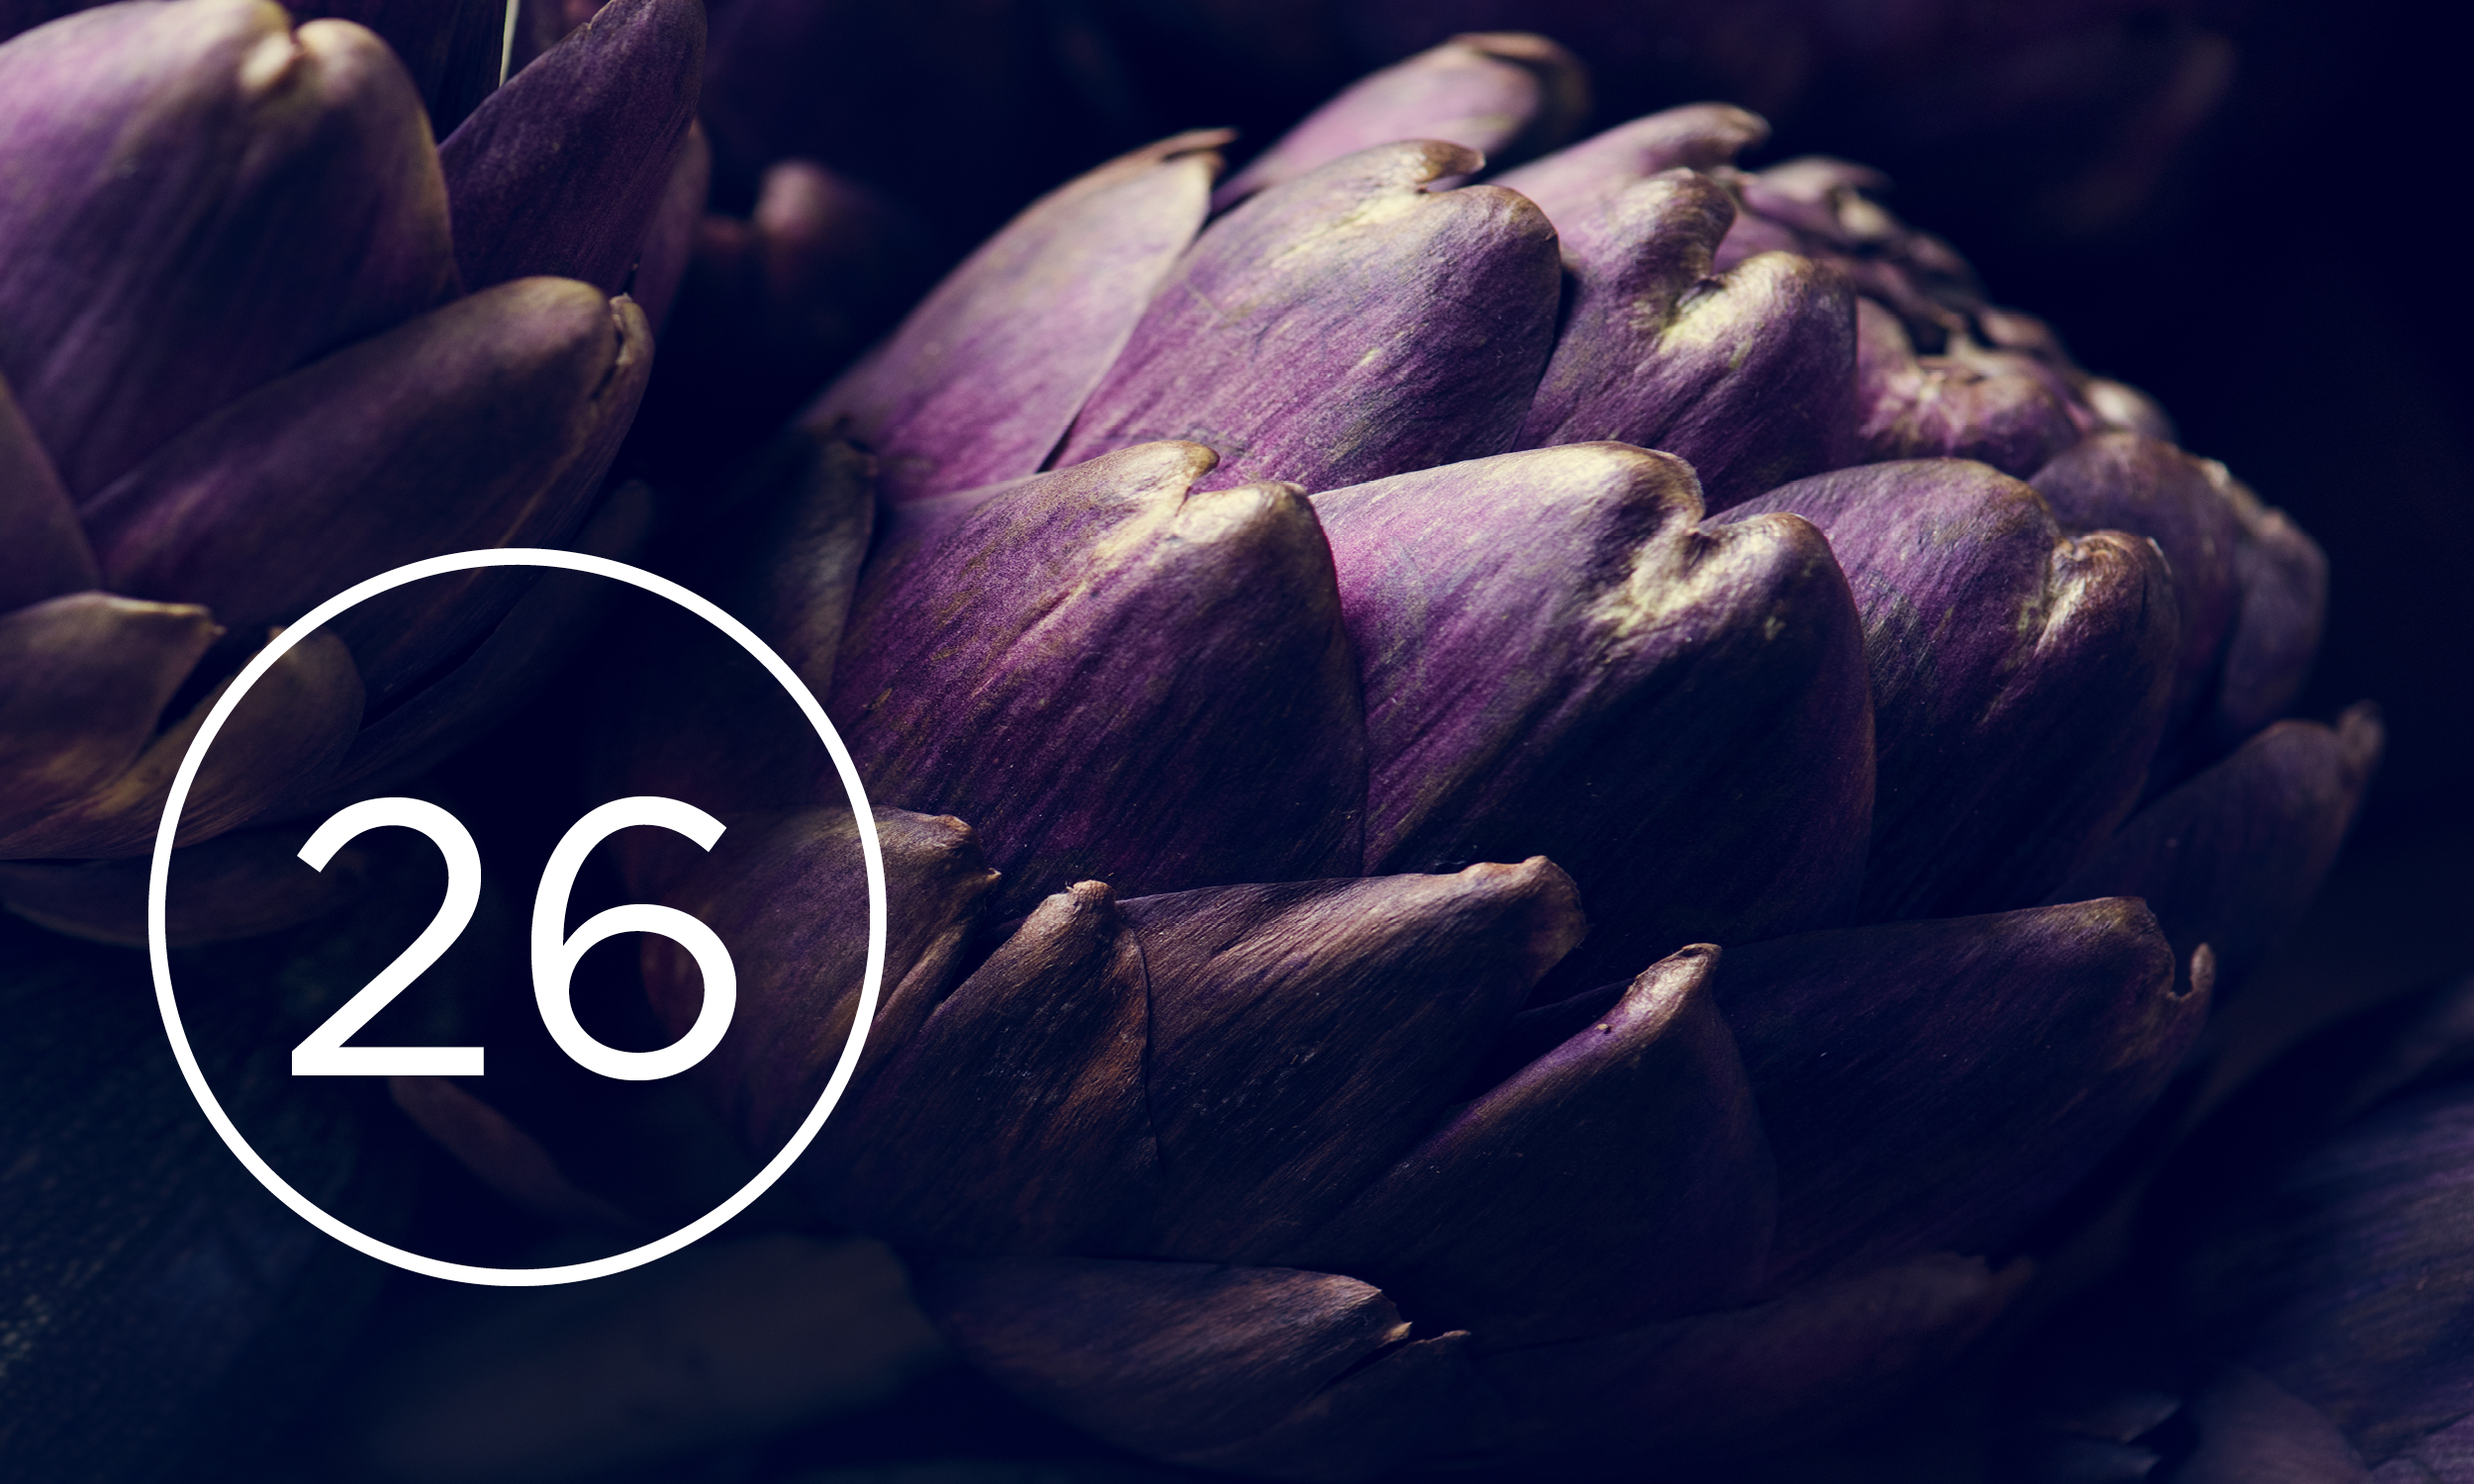 Artichoke with number 26